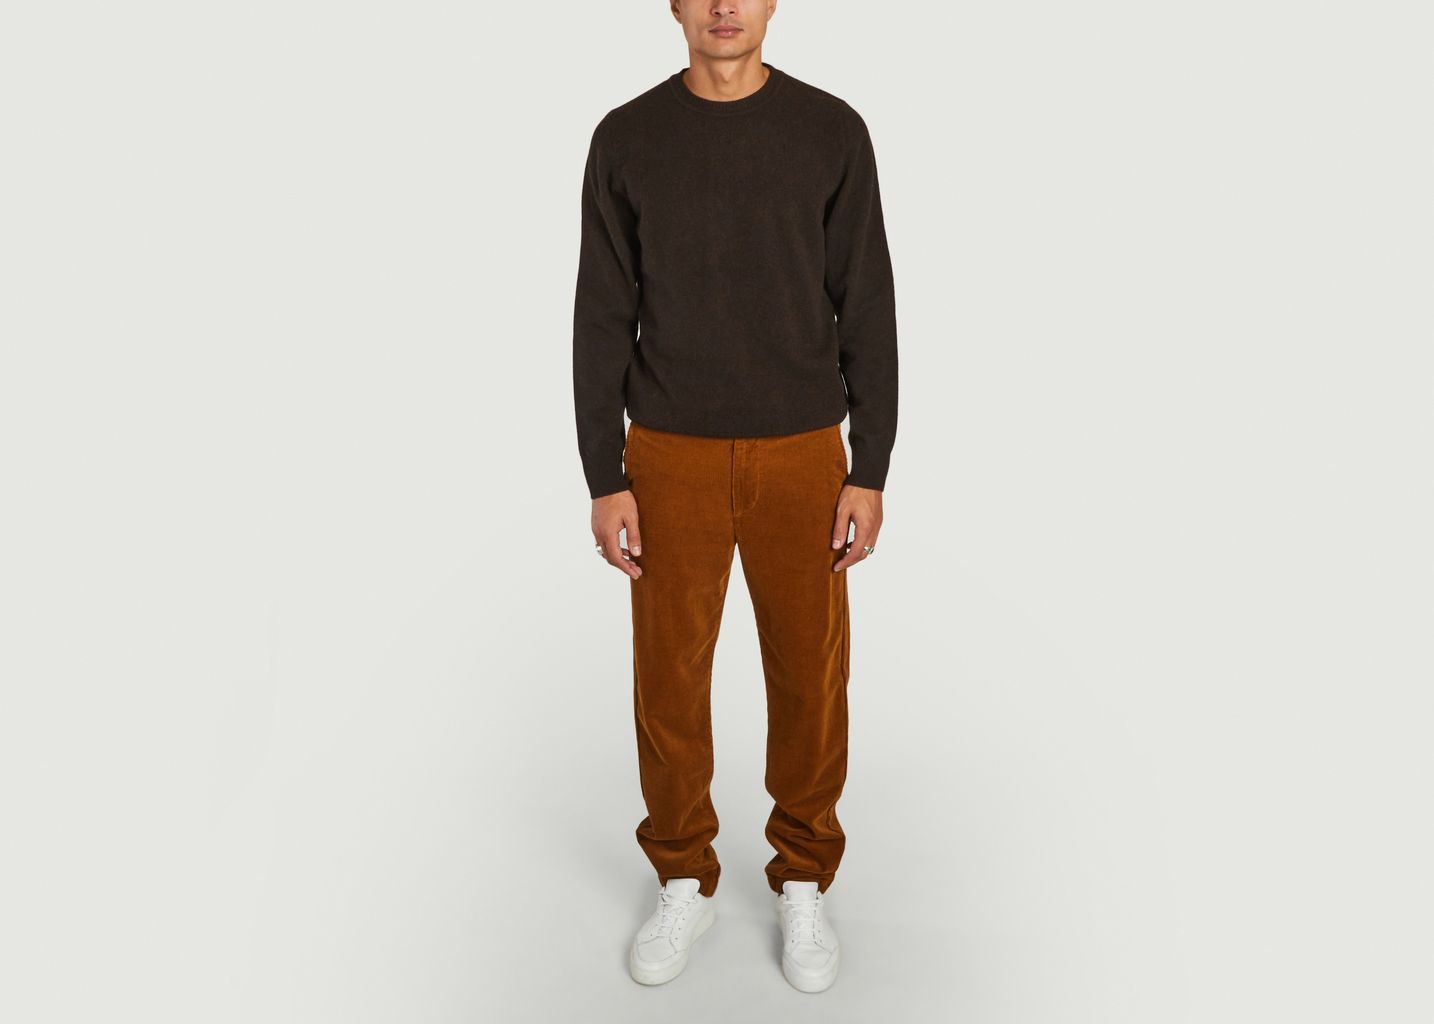 Pull Sigfred en laine d'agneau - Norse Projects